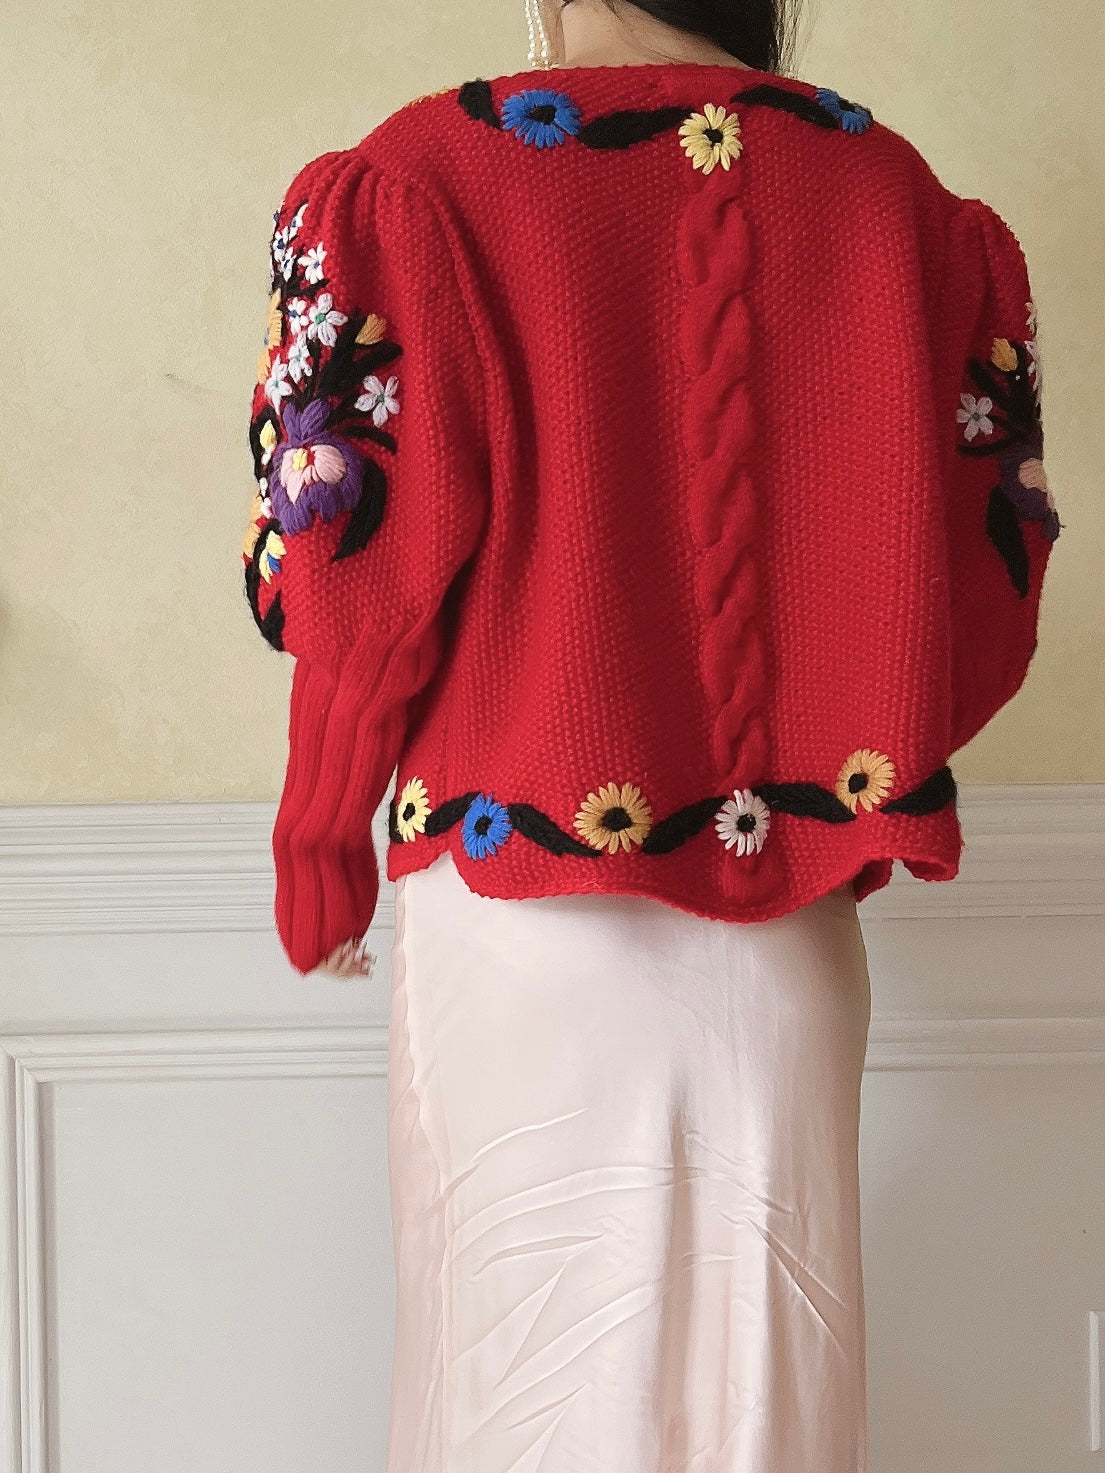 Vintage Puff Sleeves Embroidered Hand Knit Cardigan - S/M